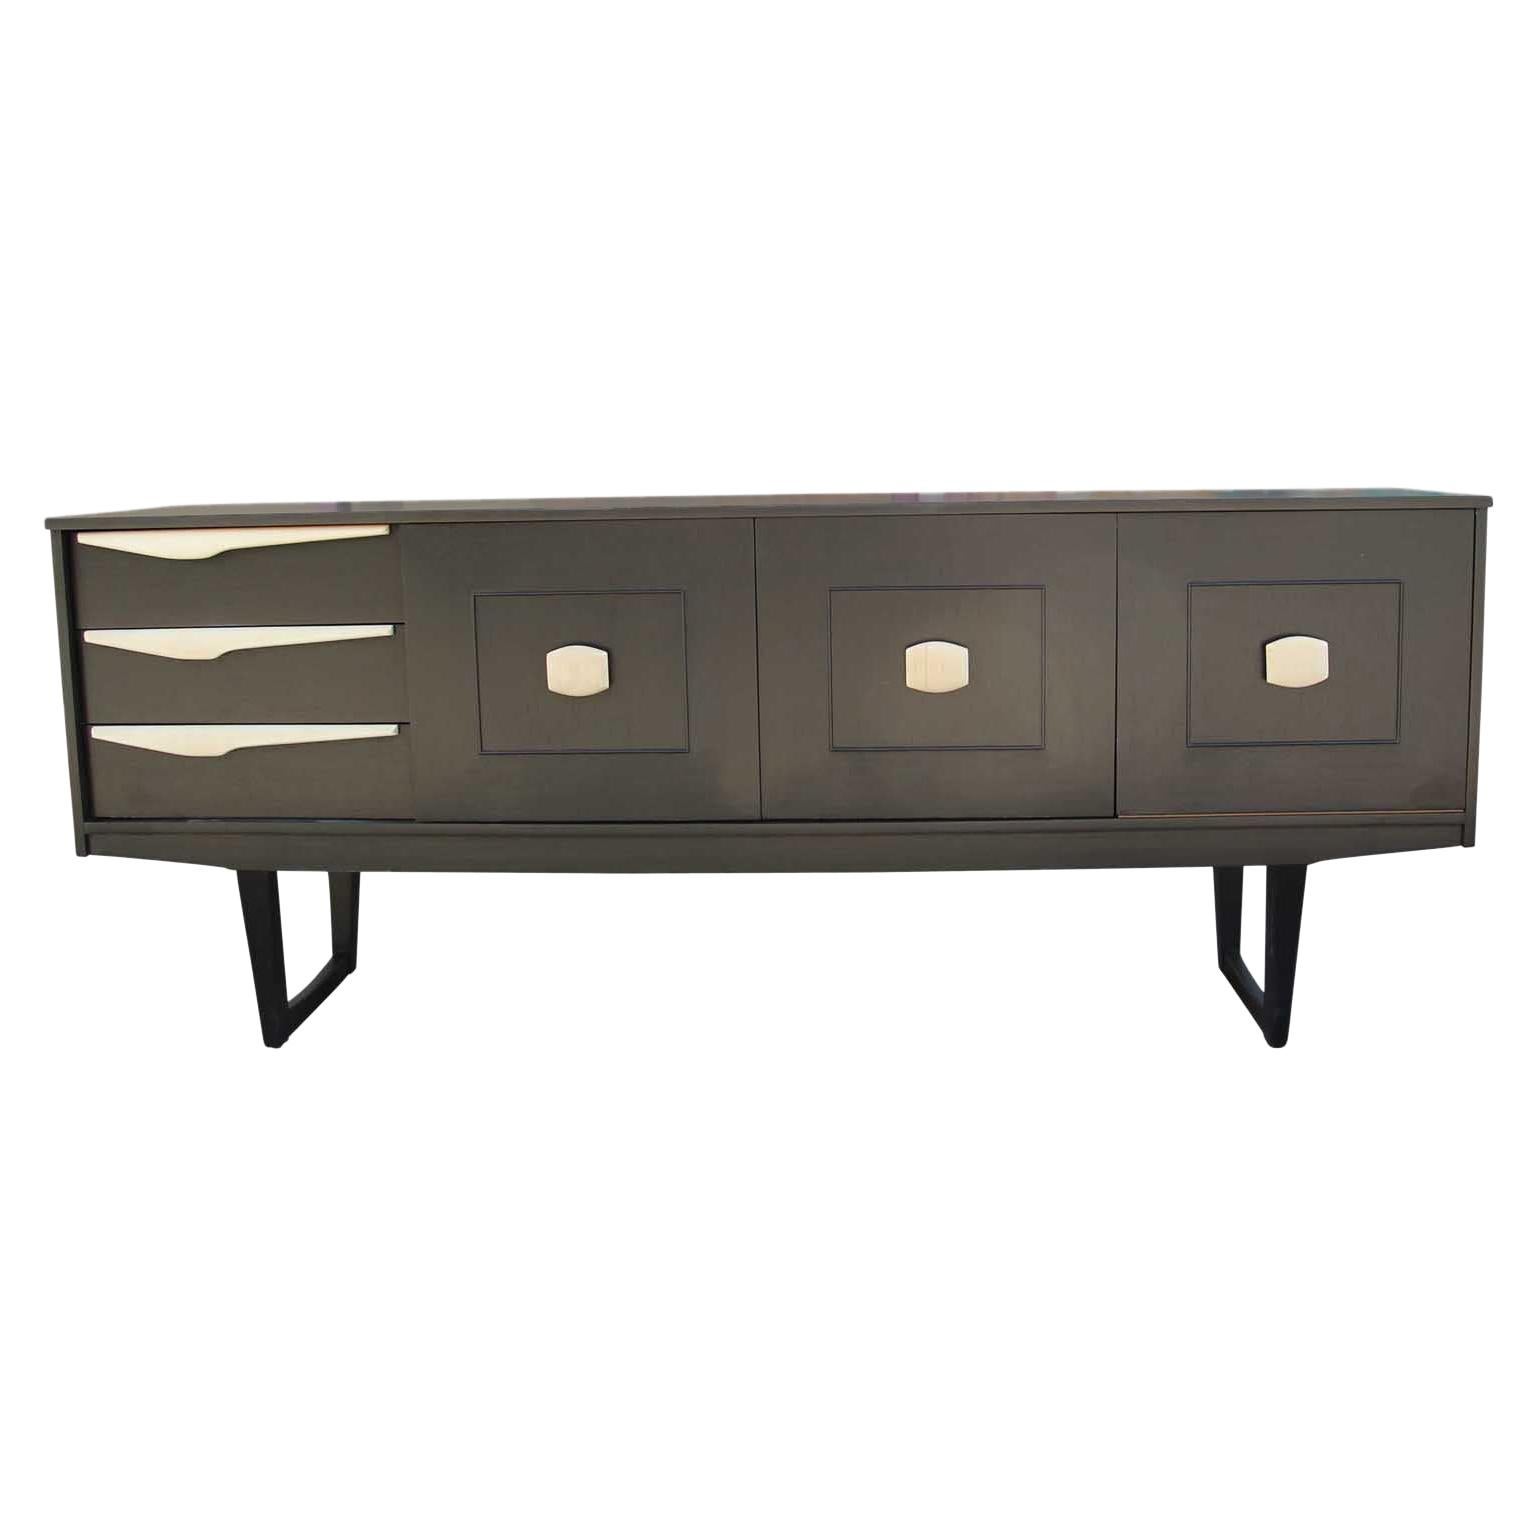 Modern Restored Two Toned Black and Natural Wood Finish Credenza/Sideboard